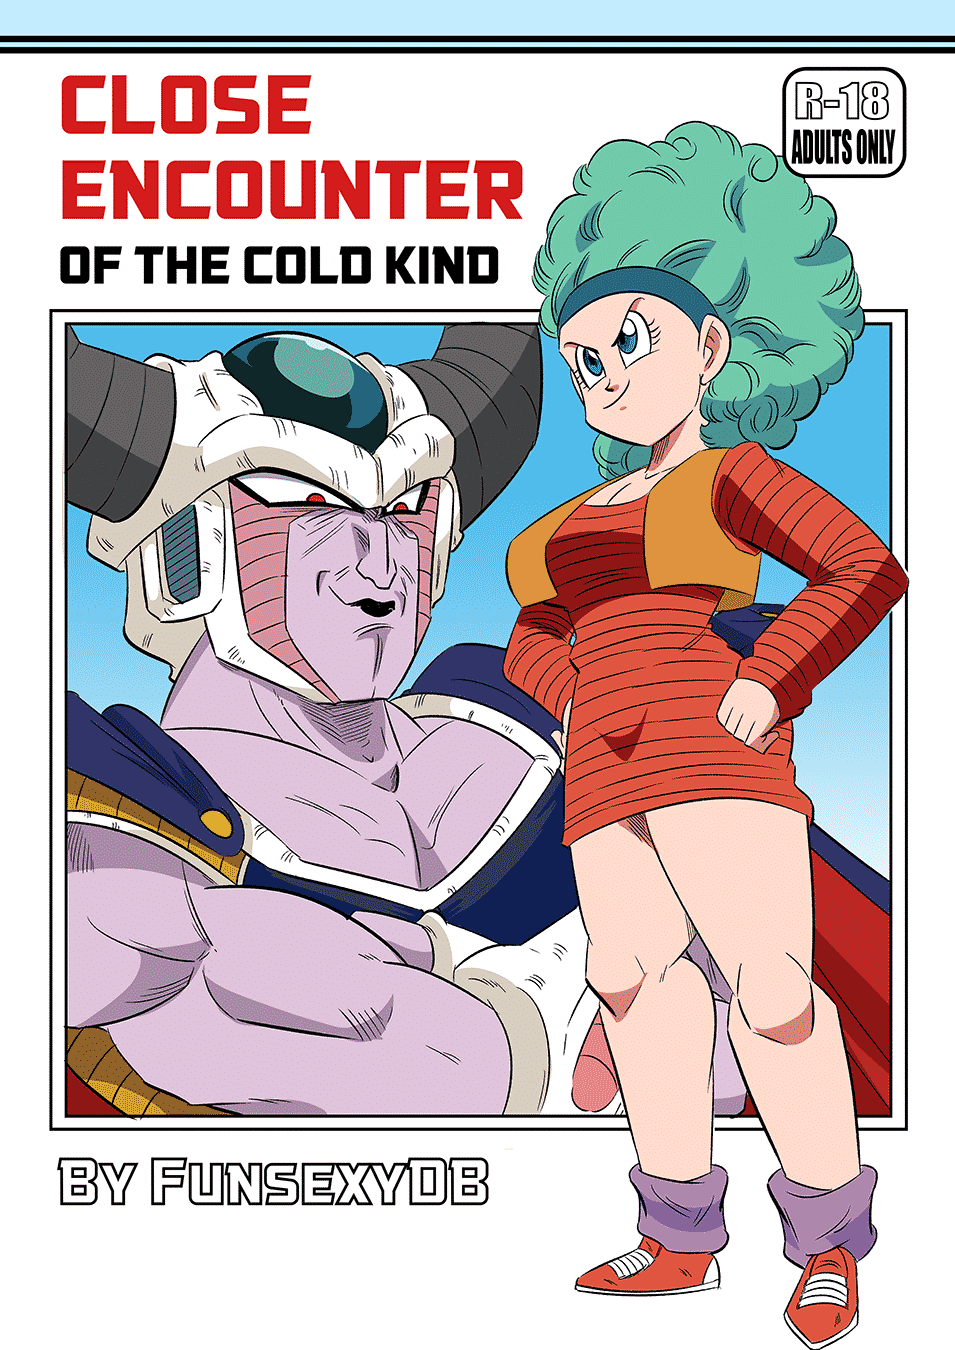 Close Encounter of the Cold Kind (Dragon Ball Z) FunsexyDB